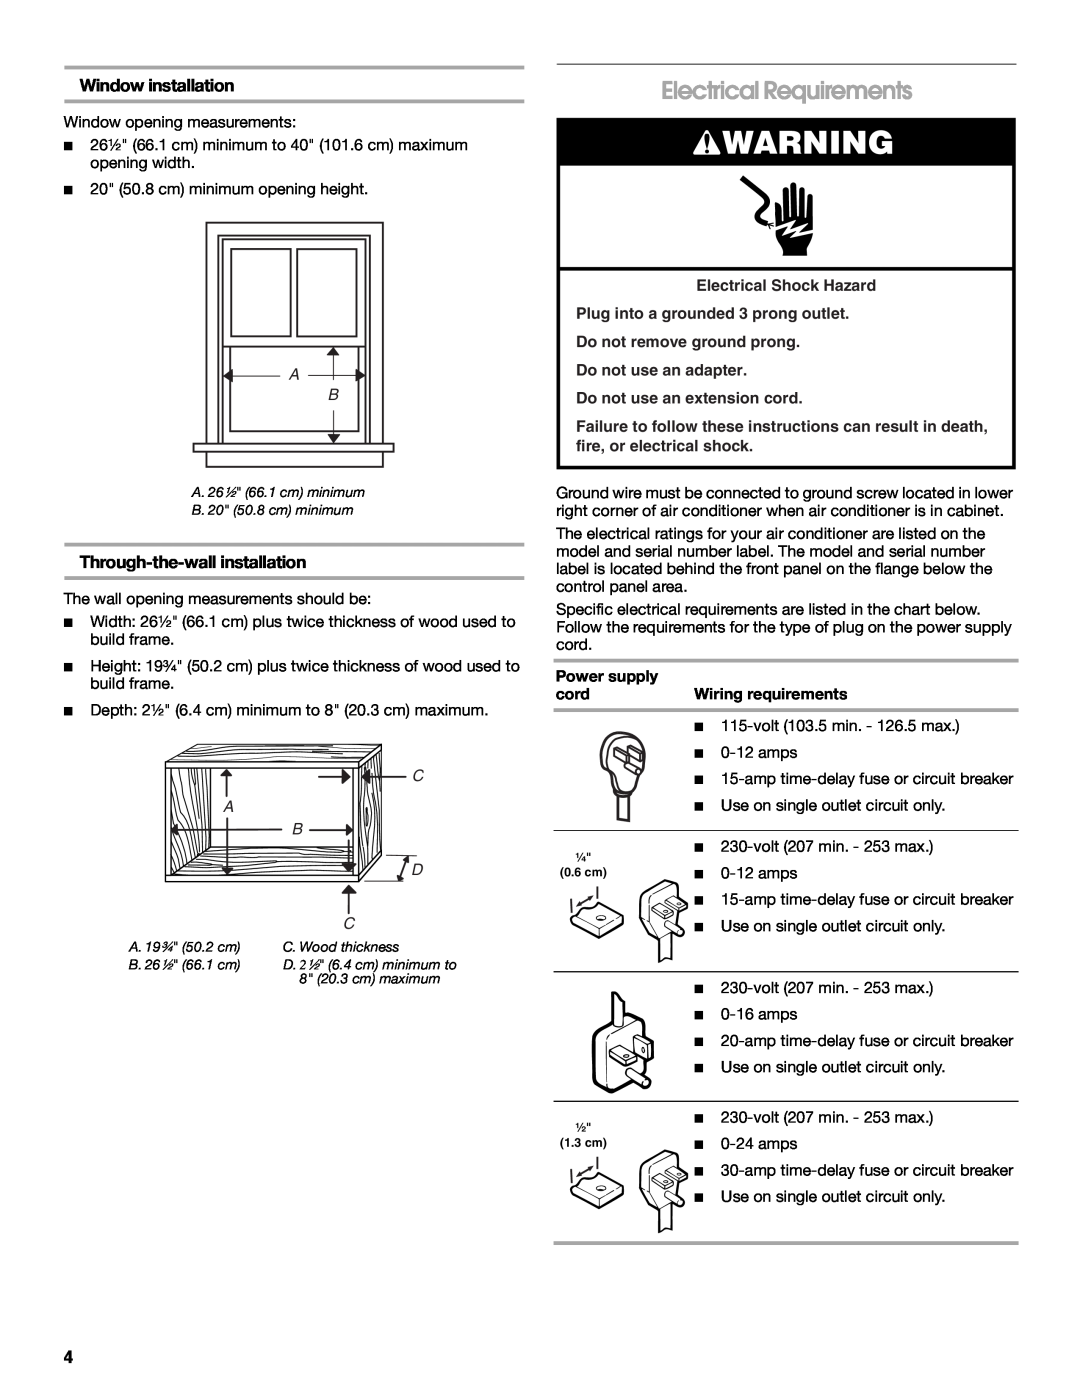 Whirlpool ACE184XR0 manual Electrical Requirements, Window installation, Through-the-wallinstallation, C A B D 